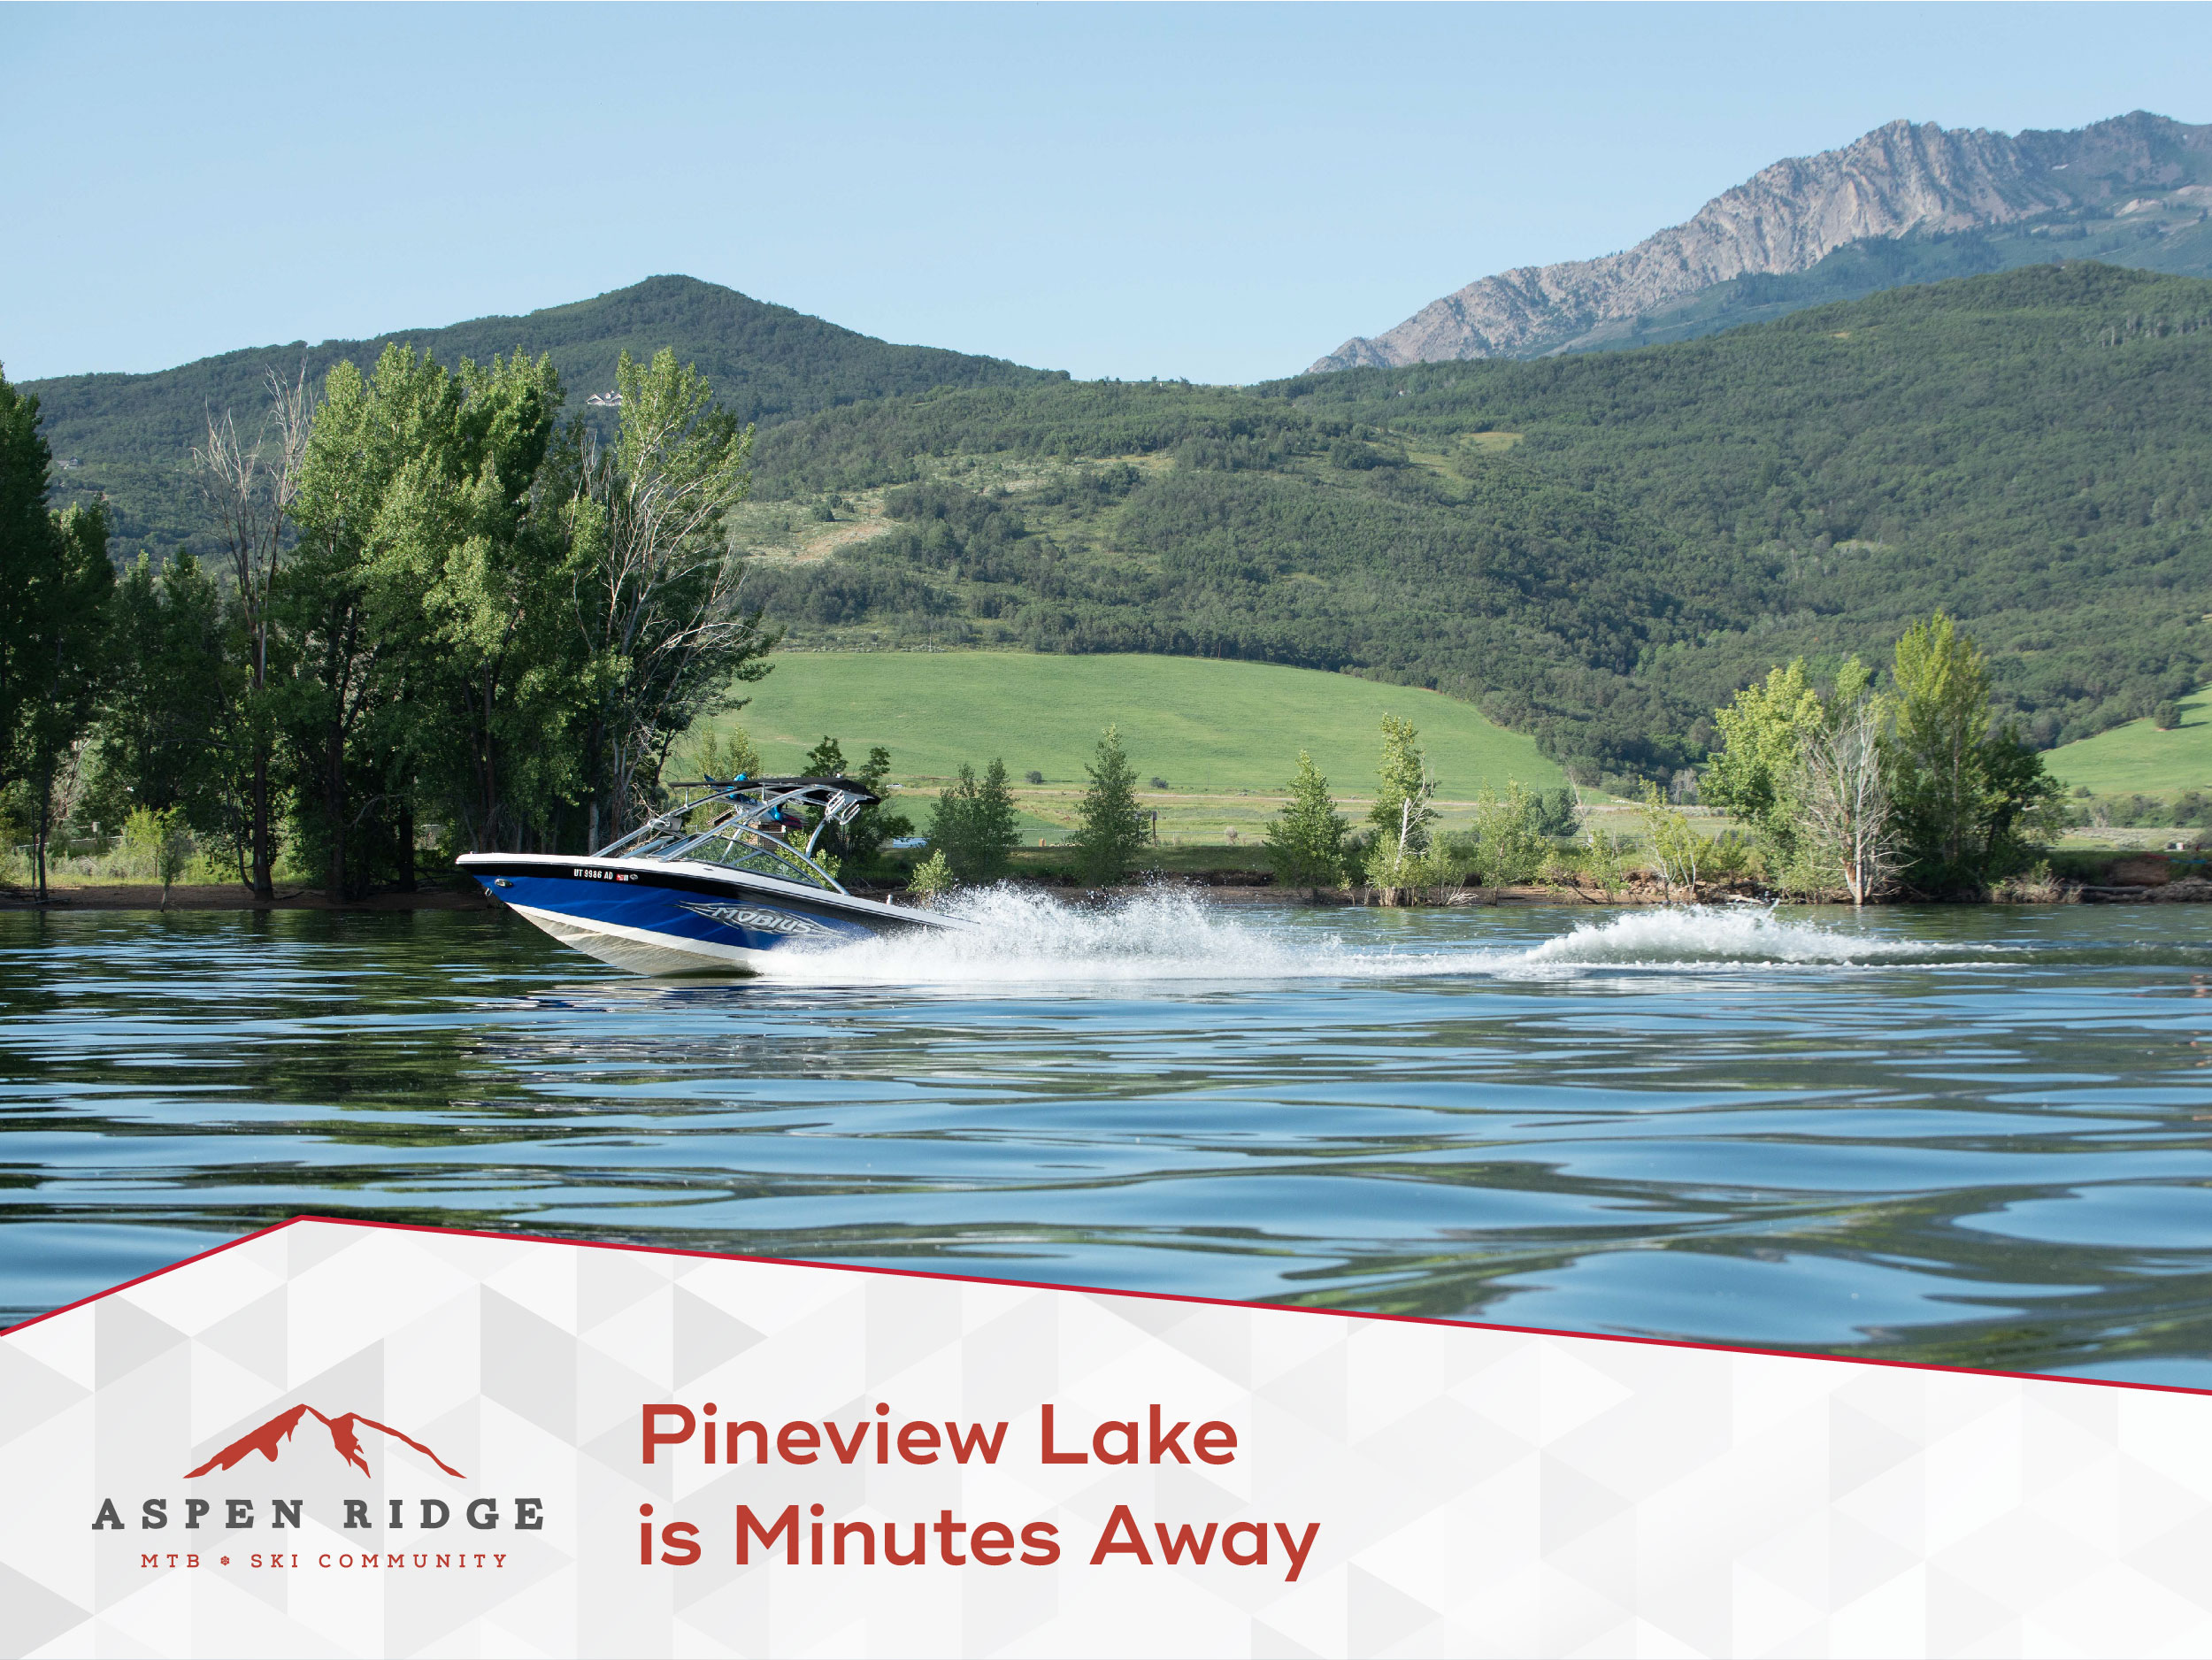 Pineview Lake is Minutes Away. A Boat is on the lake.